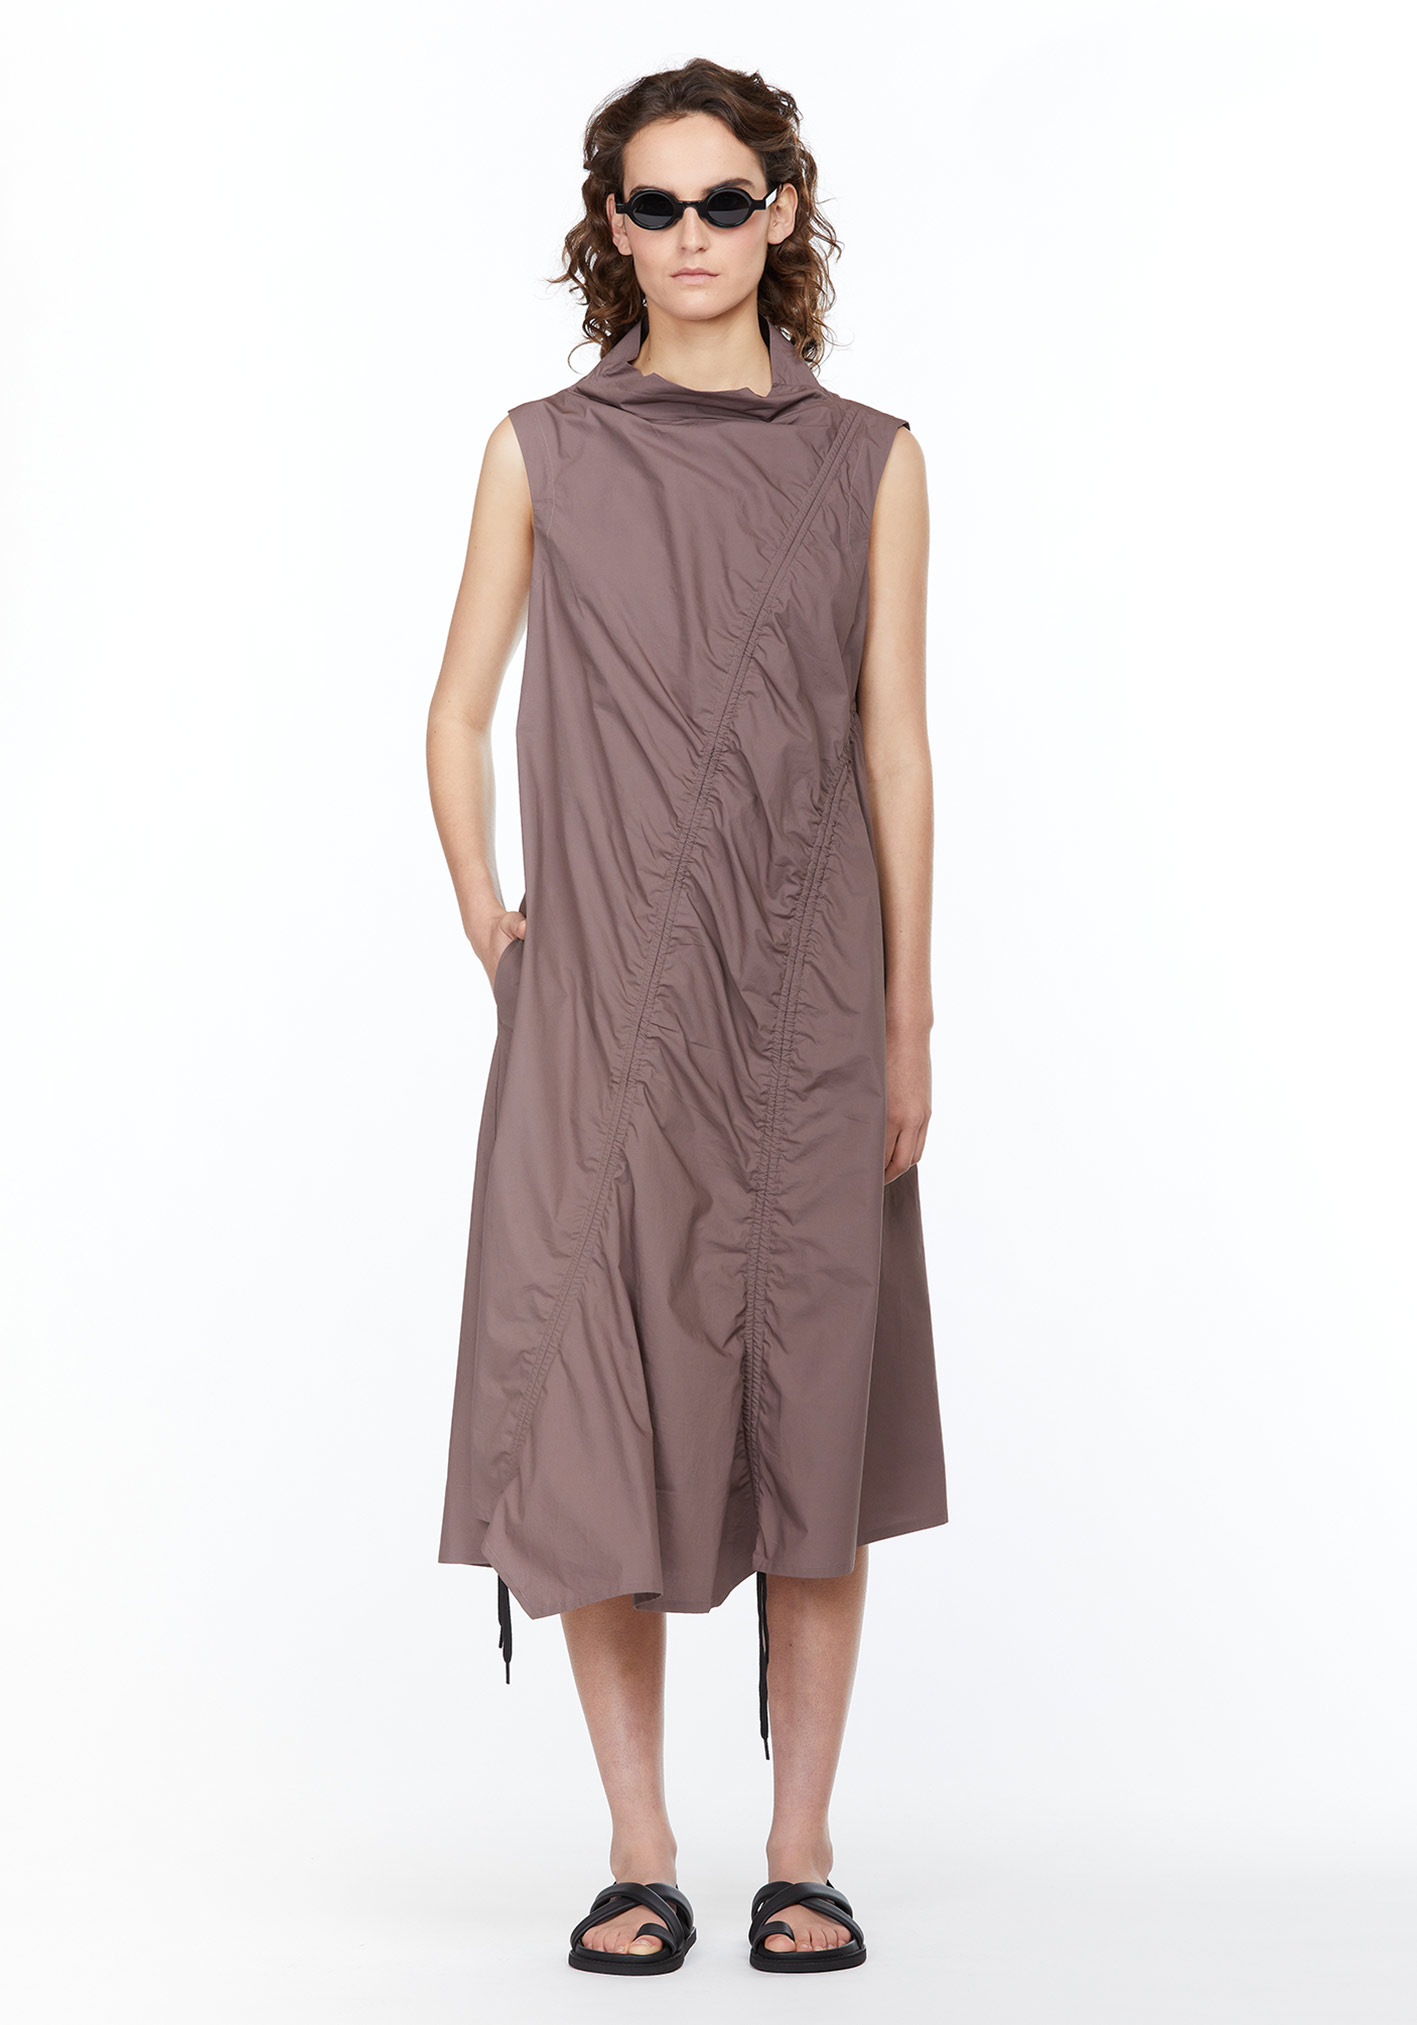 buy the latest Interval Channel Dress online